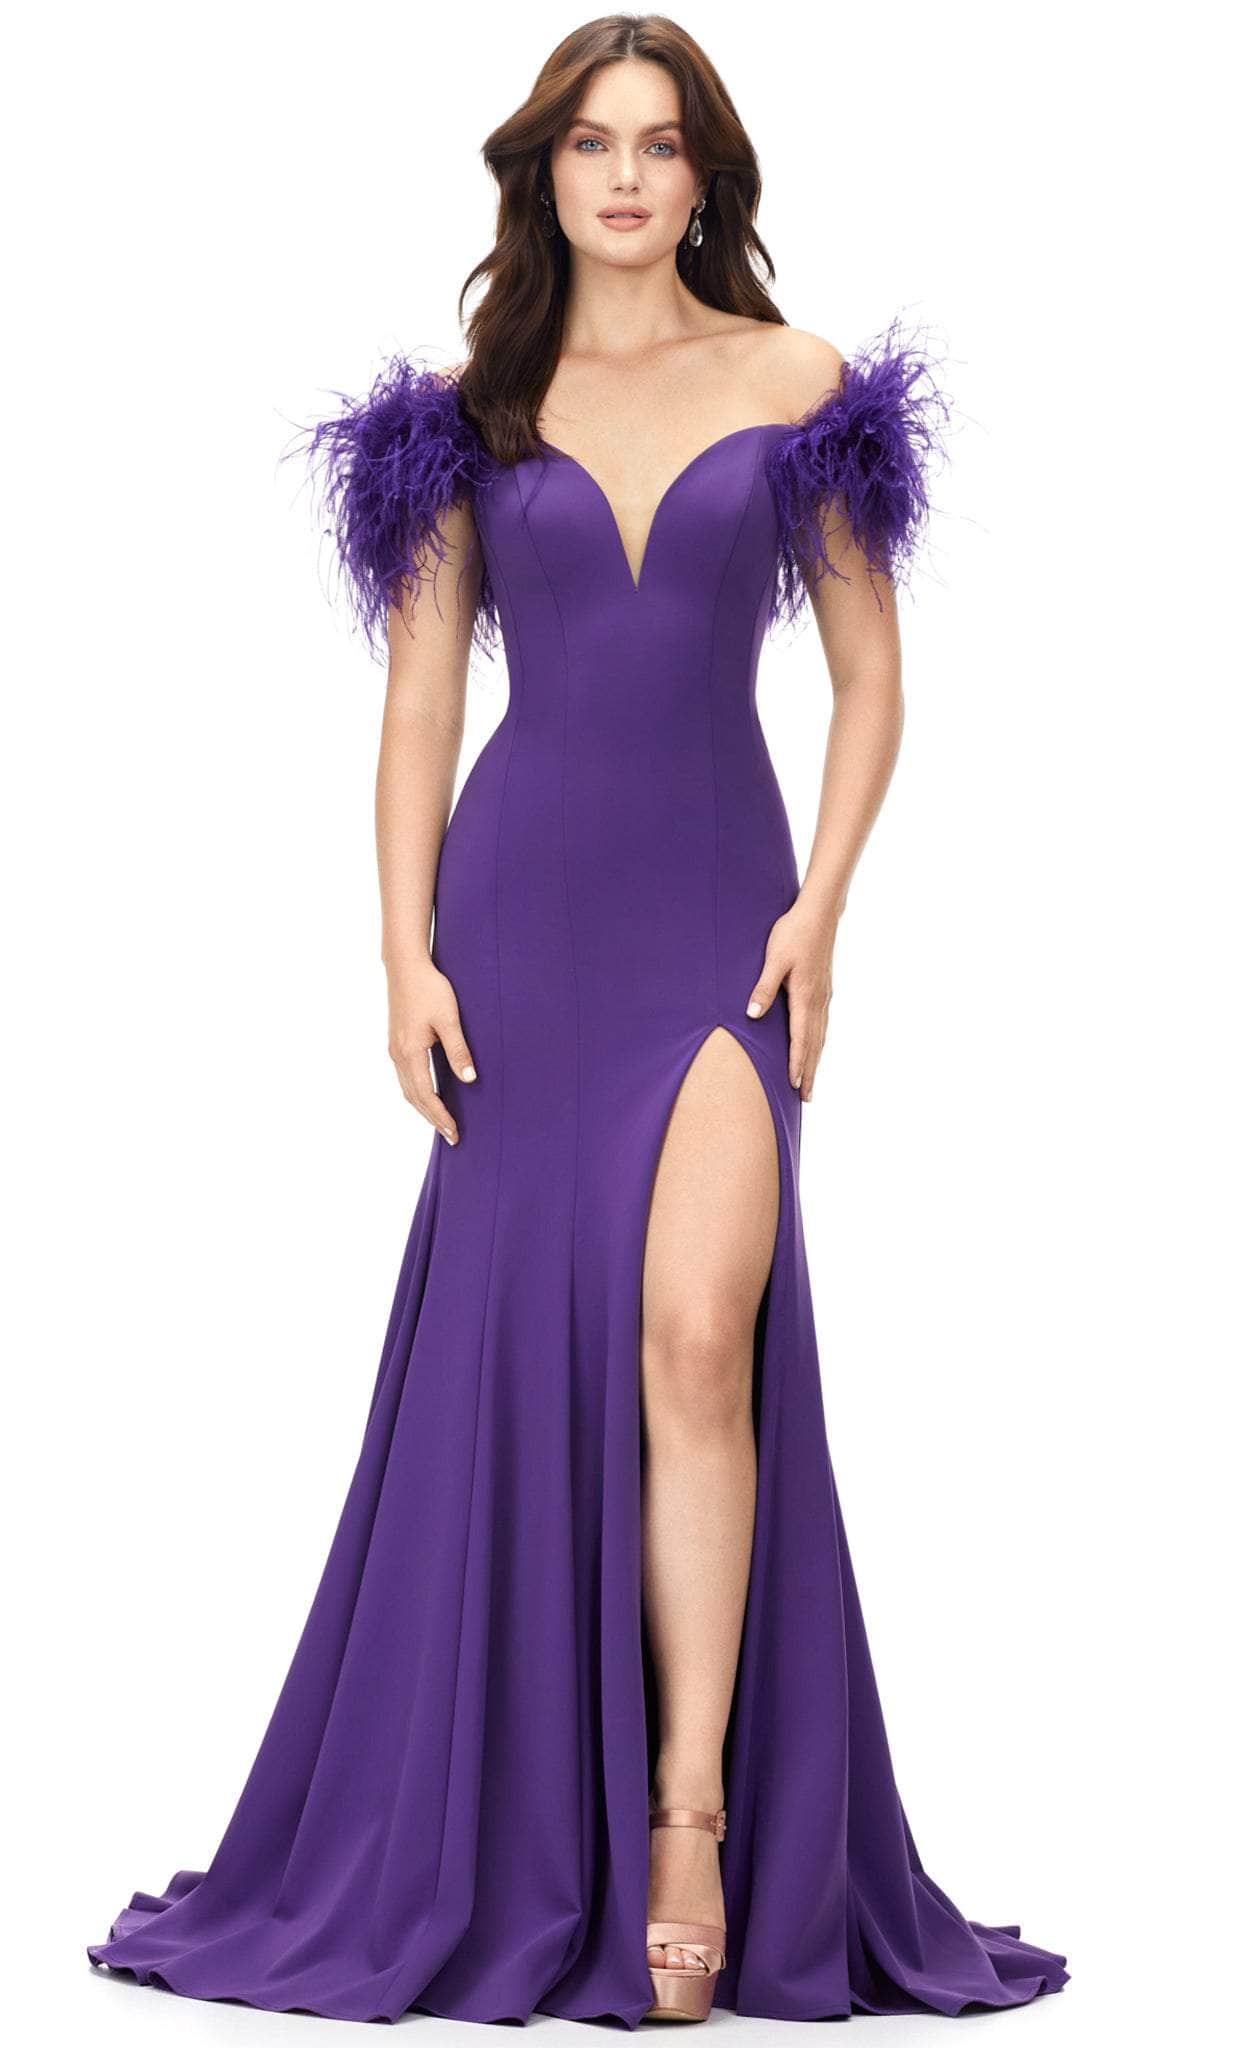 Image of Ashley Lauren 11101 - Feathered Sleeve Mermaid Evening Gown